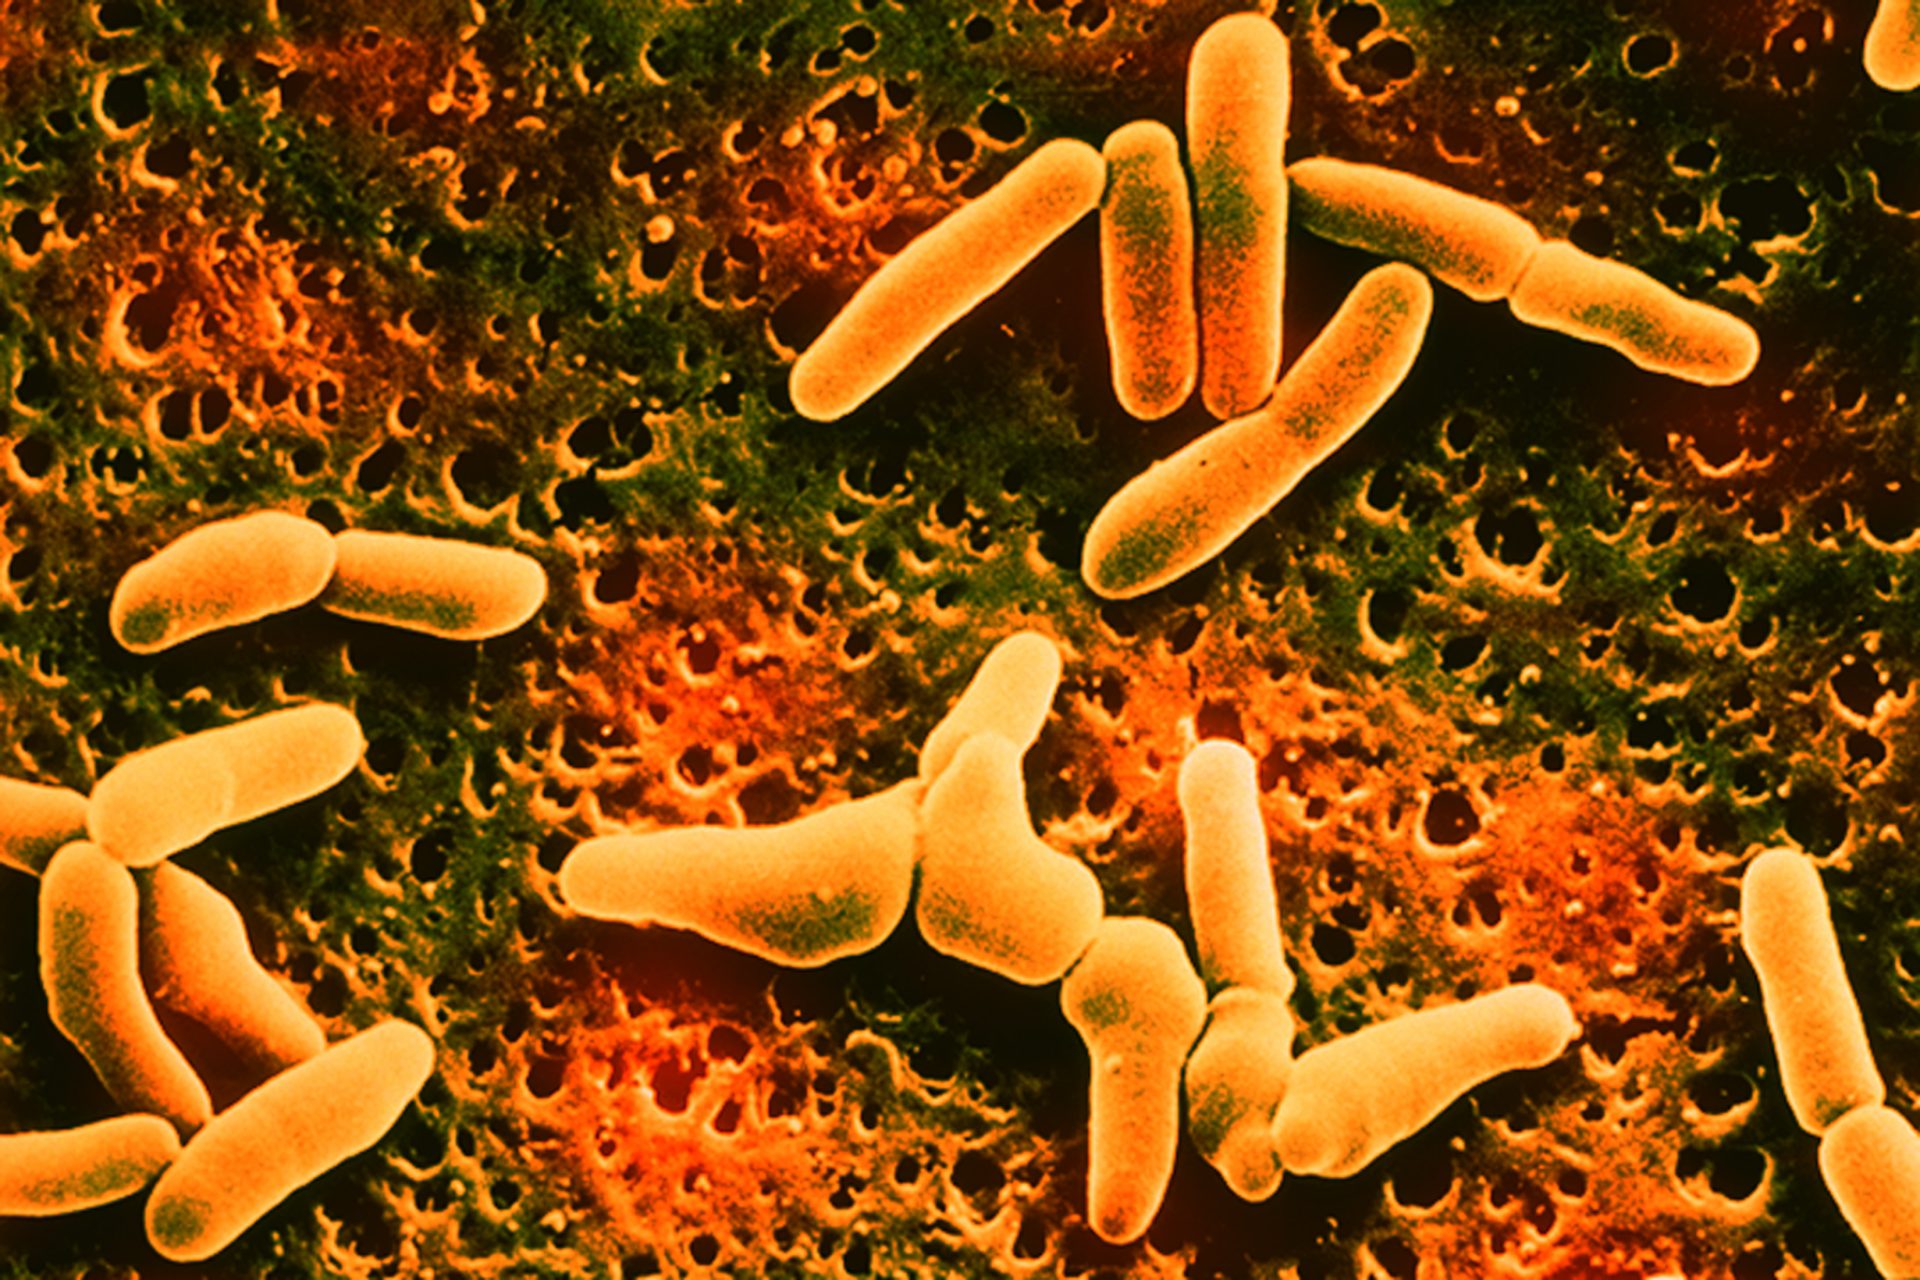 Recent Listeria Outbreak Leaves One Person Dead And 22 Hospitalized